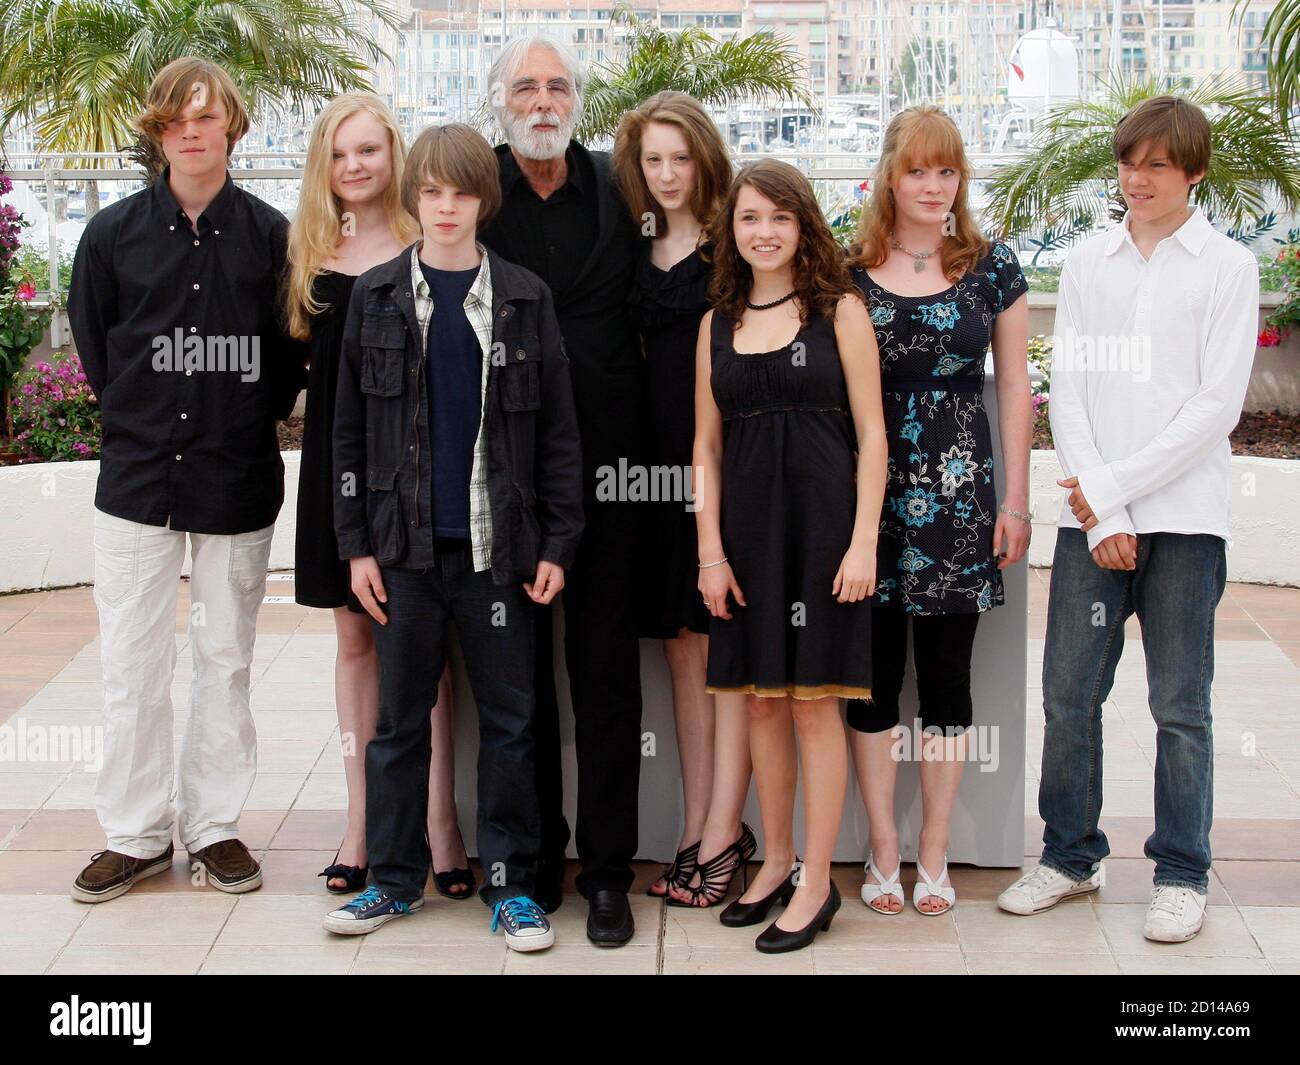 Director Michael Haneke (C) poses with cast members (L to R) Michael Kranz, Victoria Dragus, Leonard Proxauf, Roxanne Duran, Janina Fautz, Leonie Benesch and Enno Trebbs during a photo call for the film 'Das weisse Band' in competition at the 62nd Cannes Film Festival, May 21, 2009. Twenty films compete for the prestigious Palme d'Or which will be awarded on May 24. REUTERS/Jean-Paul Pelissier (FRANCE ENTERTAINMENT) Stock Photo